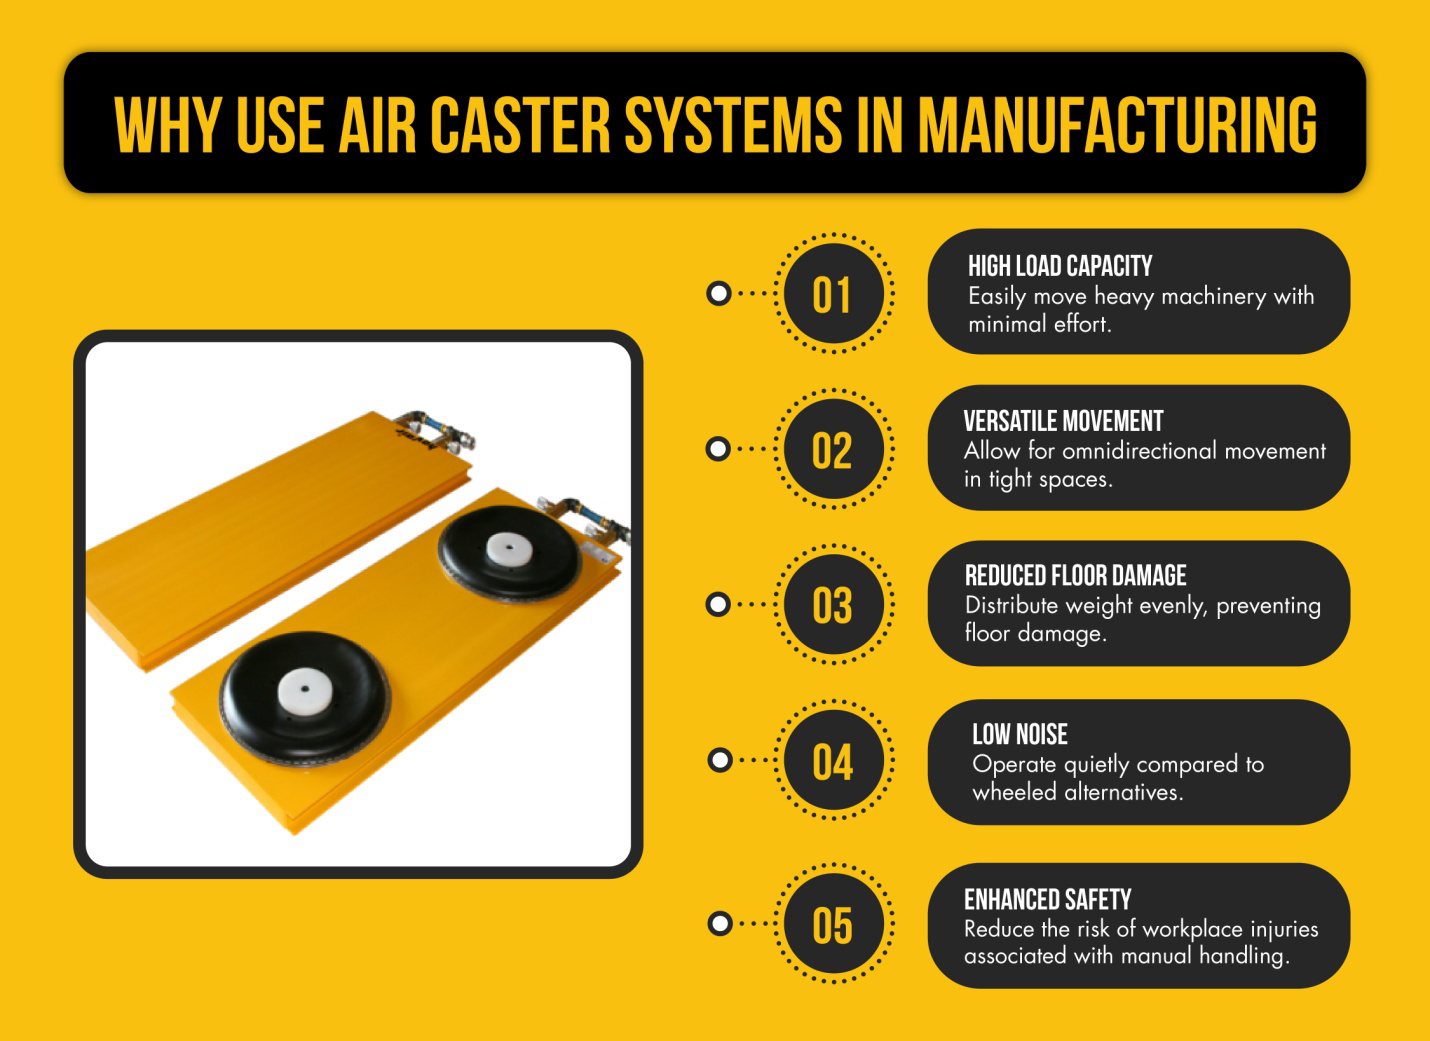 An inforgraphic explainig why we should use air caster systems in manufacturing